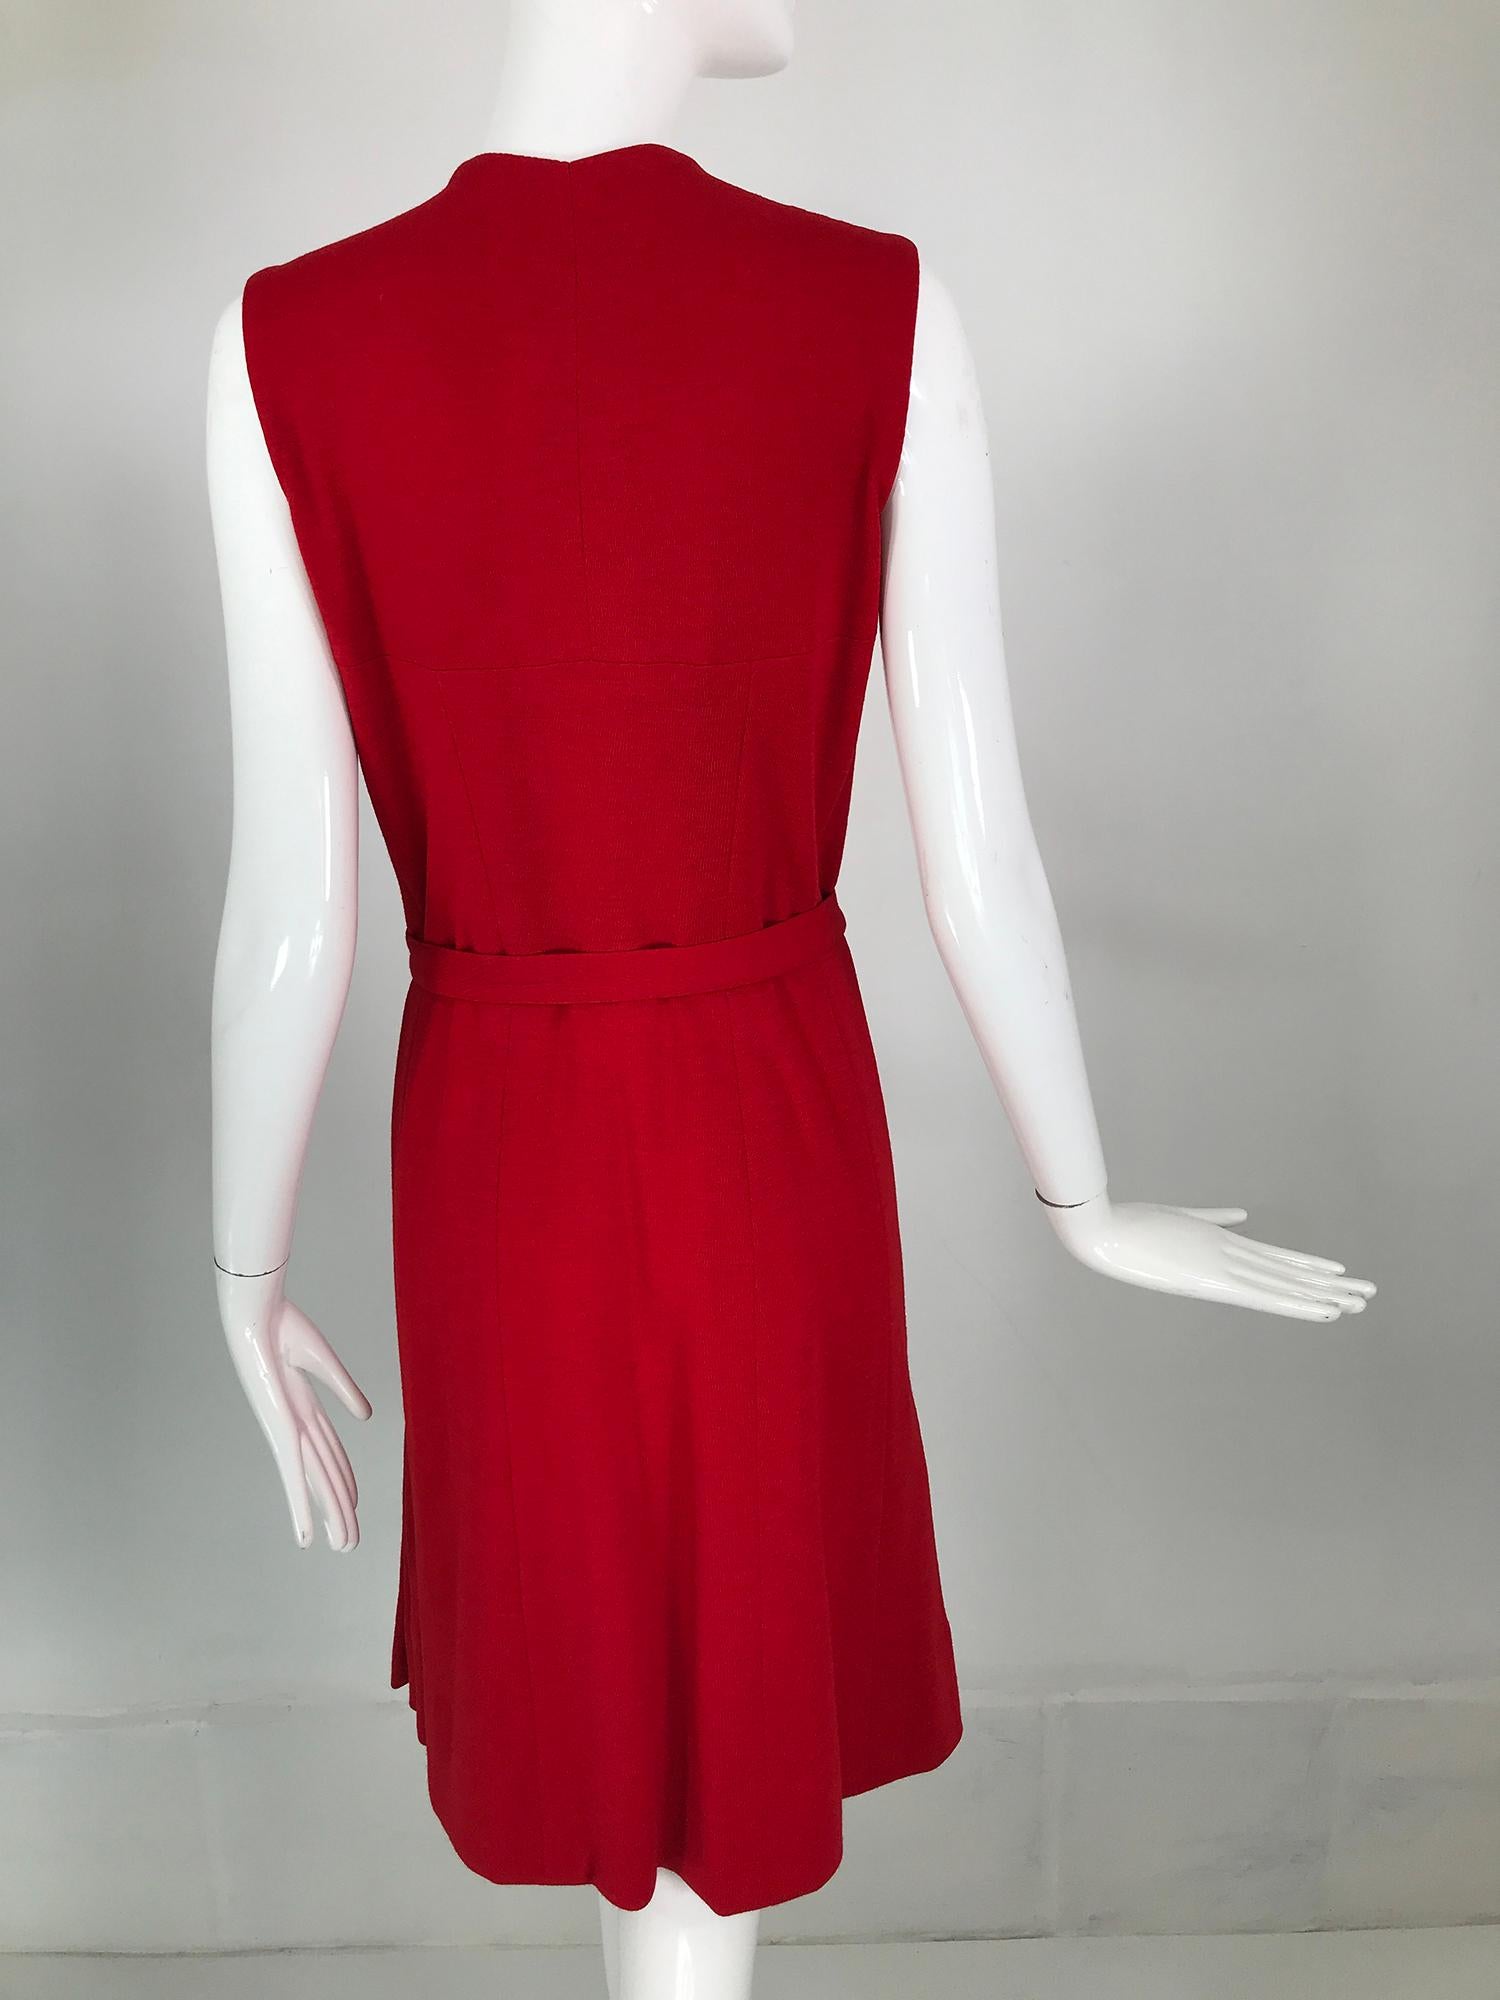 Coco Chanel Red Haute Couture 1950s 2 pc Wool Jersey Jewel Button Dress & Coat  For Sale 6